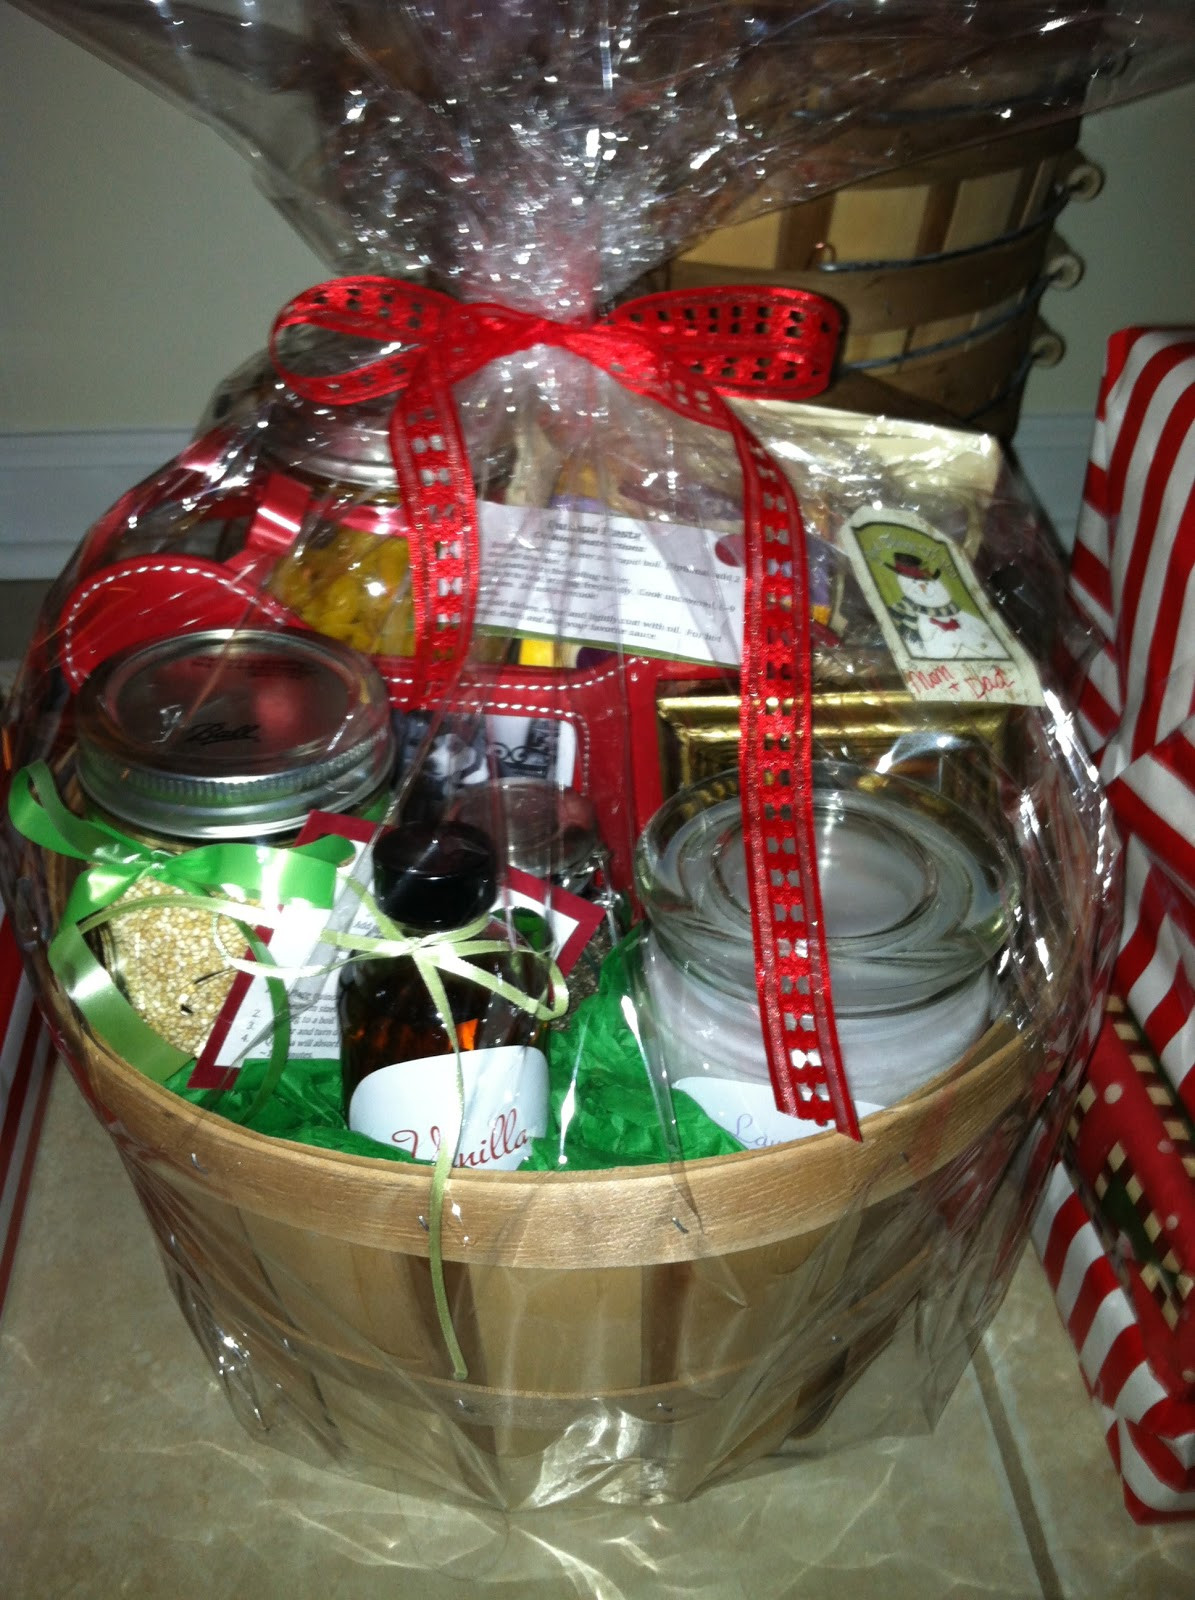 Ideas For Making Gift Baskets At Home
 melicipes Healthy & Homemade Gift Baskets